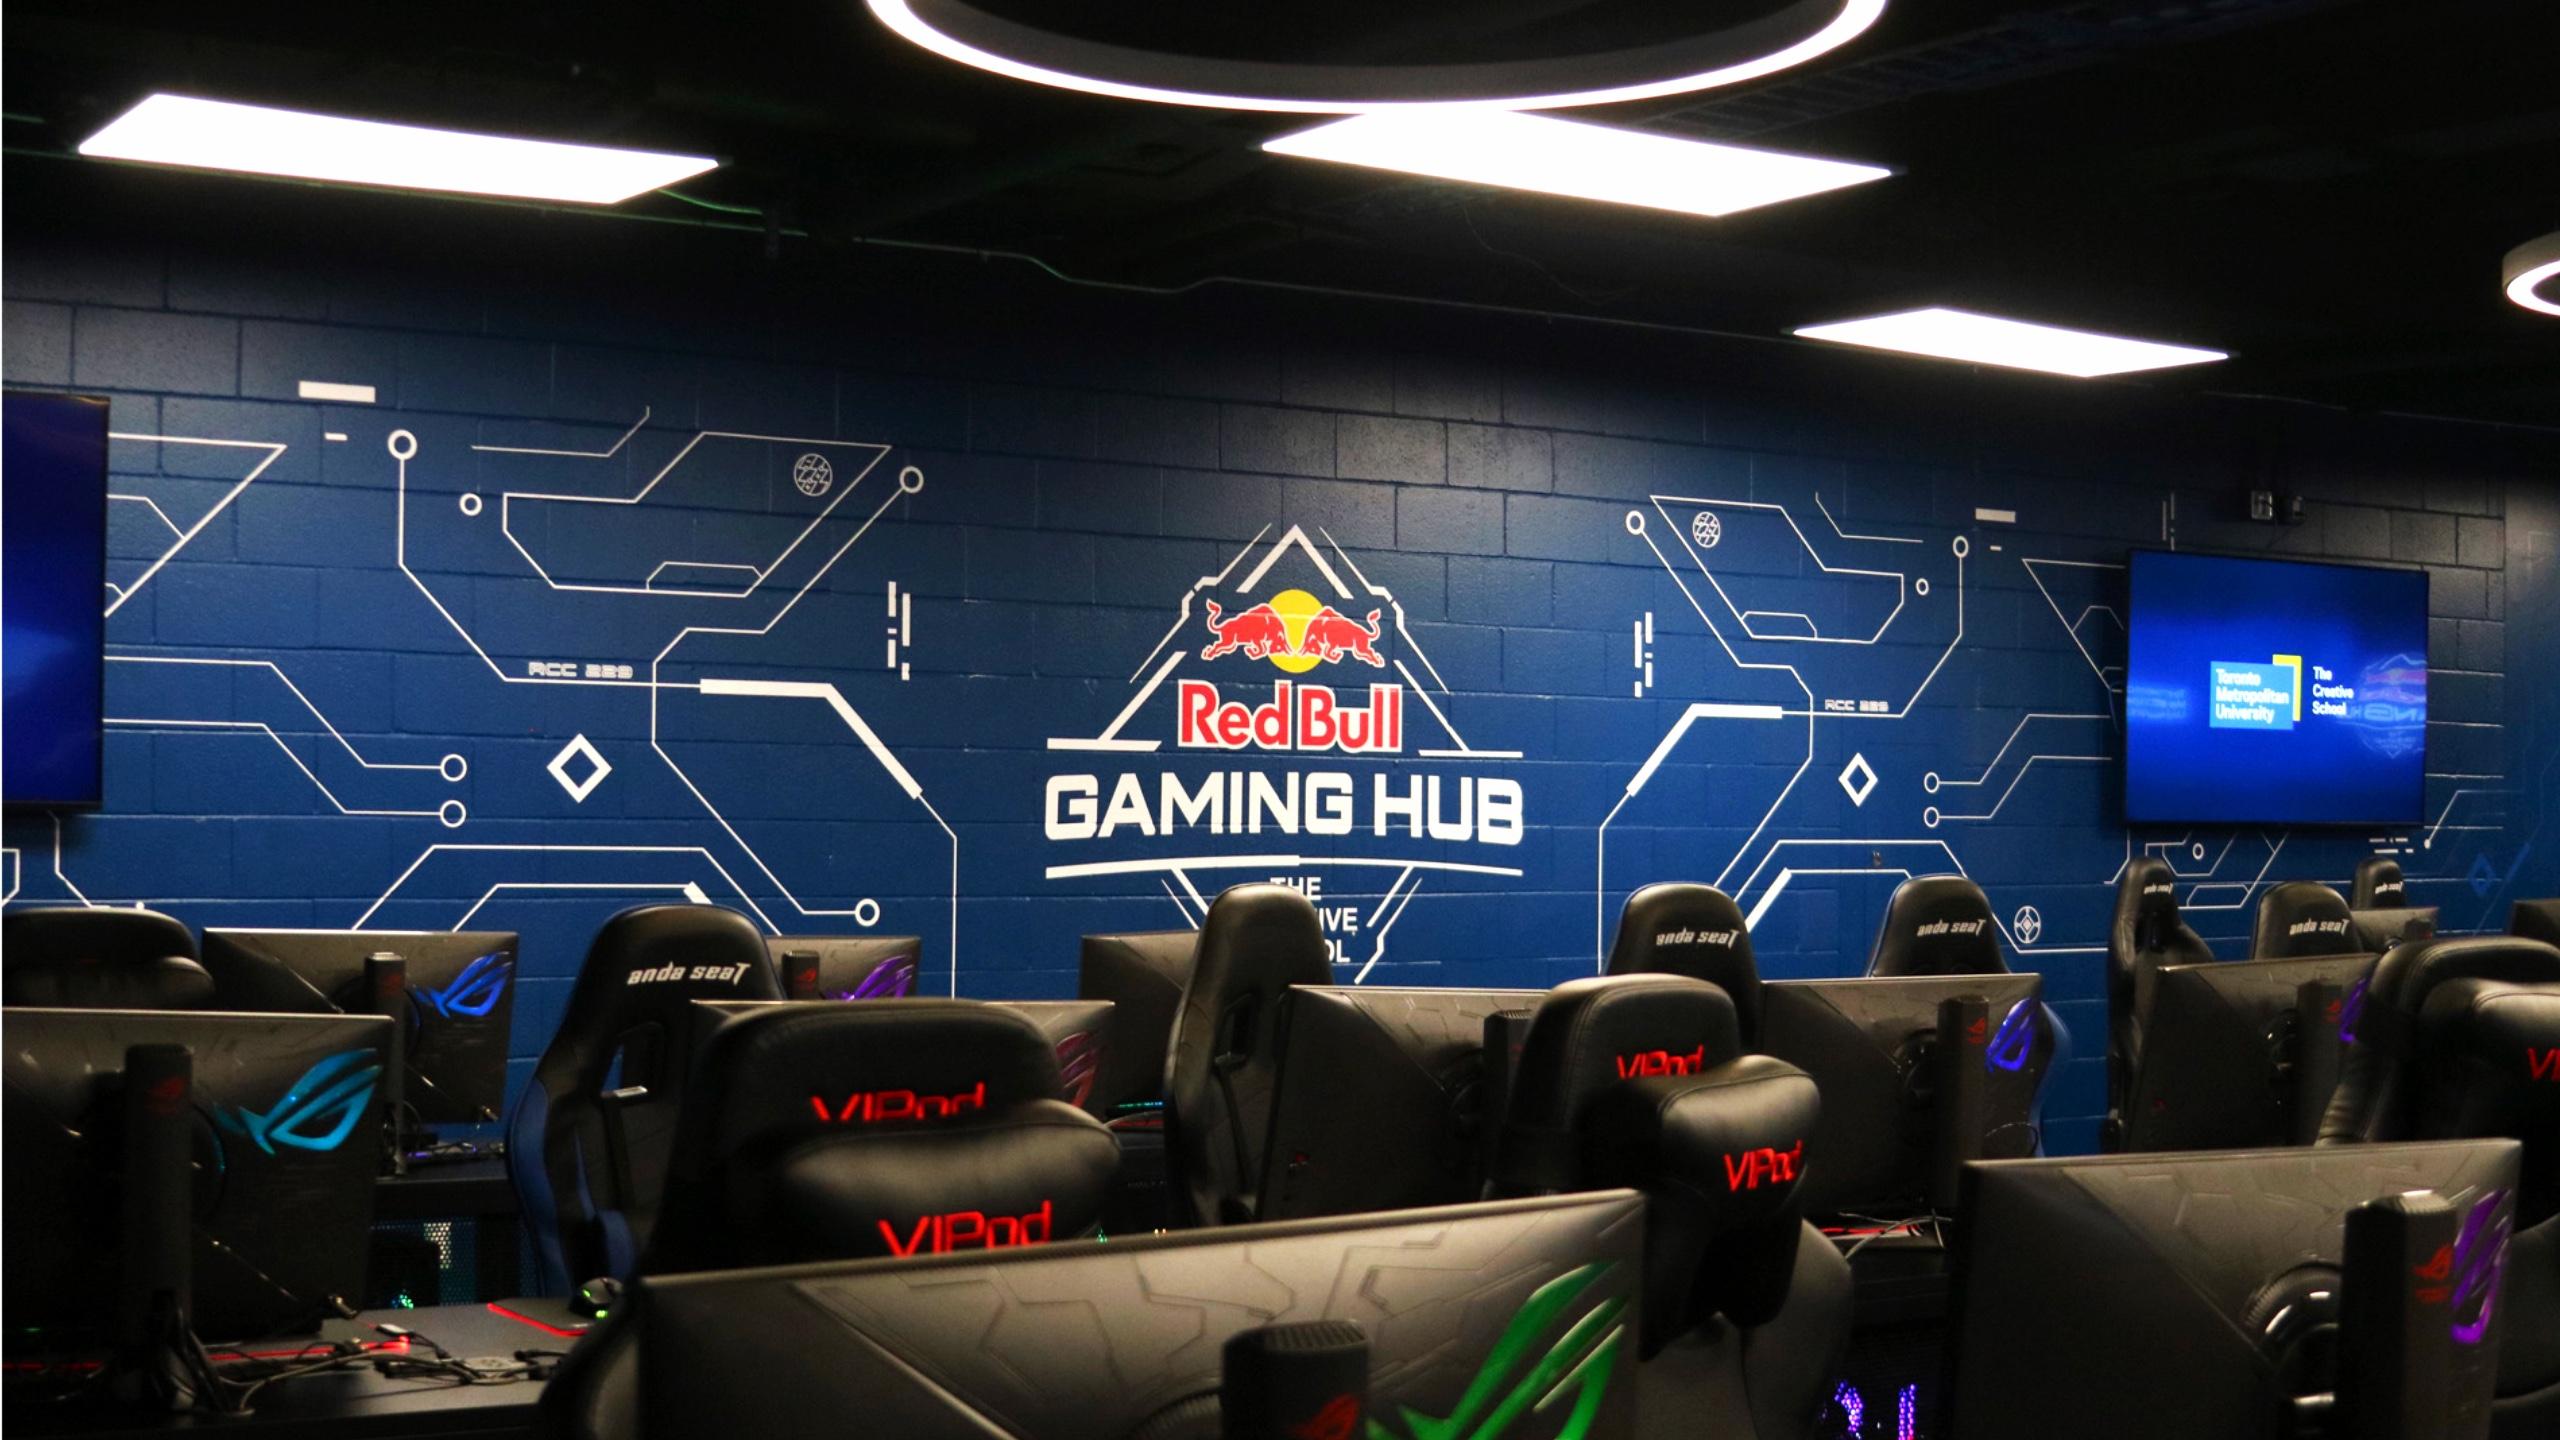 Rows of gaming chairs and computers. On the blue wall at the back of the rooms is the RedBull logo, and the words "Red Bull Gaming Hub"